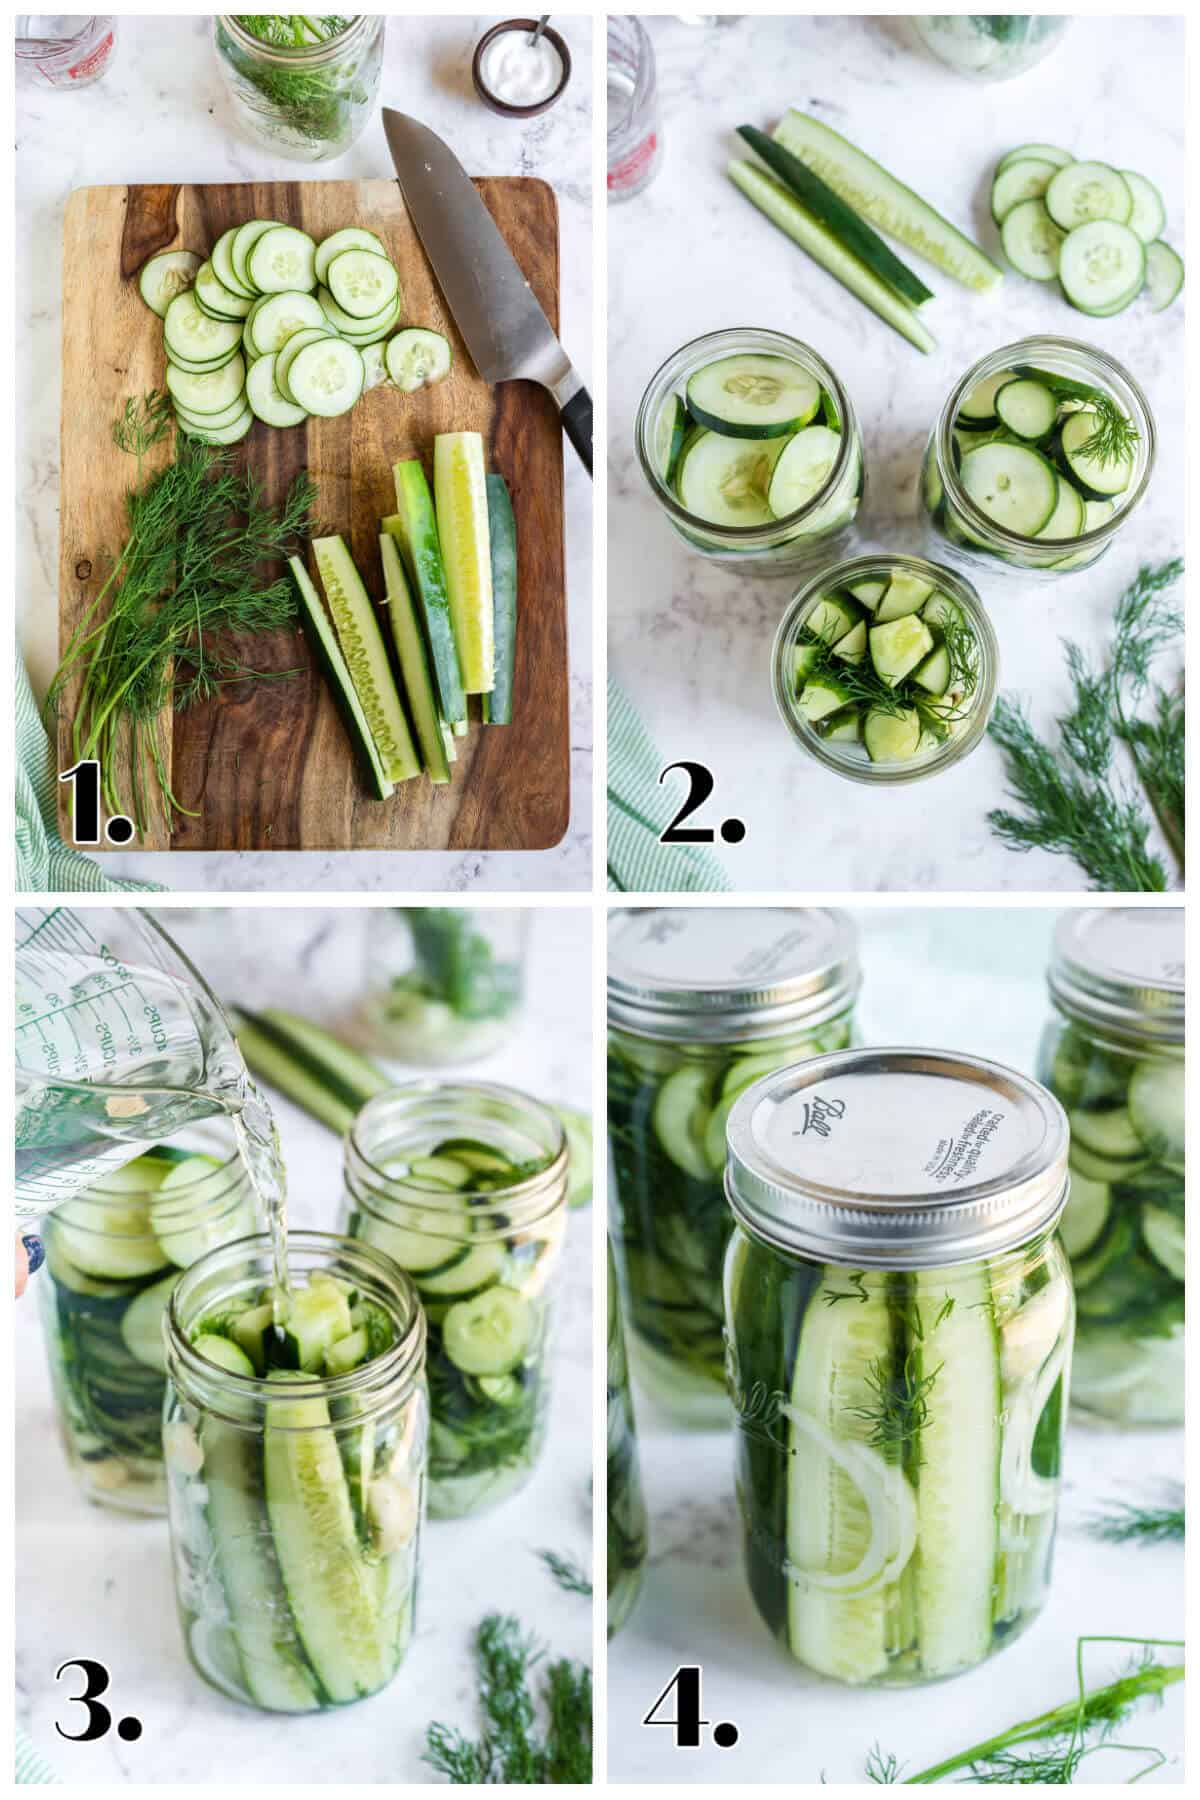 4 image collage showing how to make overnight pickles. 1- cut cucumbers and veggies; 2-place in jars; 3- fill jar with vinegar solution; 4-cover and refrigerate.